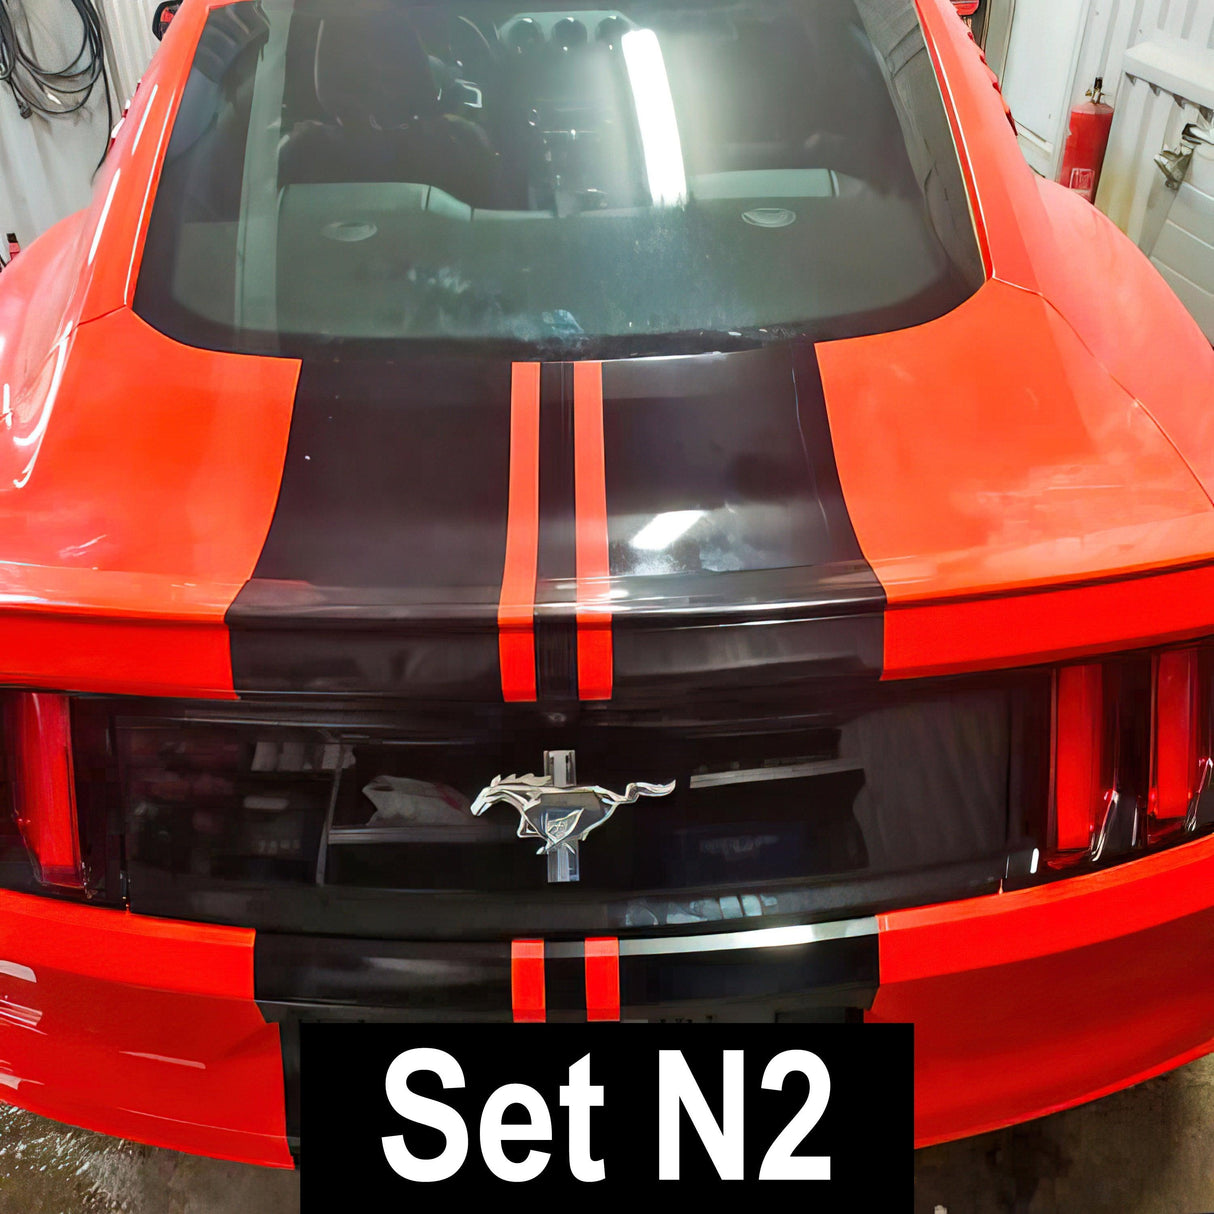 Racing Stripes Car Stickers - Auto Vinyl Decals RT - Full Vehicle Body Rally SRT GT Black Stripe Decal - Truck Sport Lines - Decords